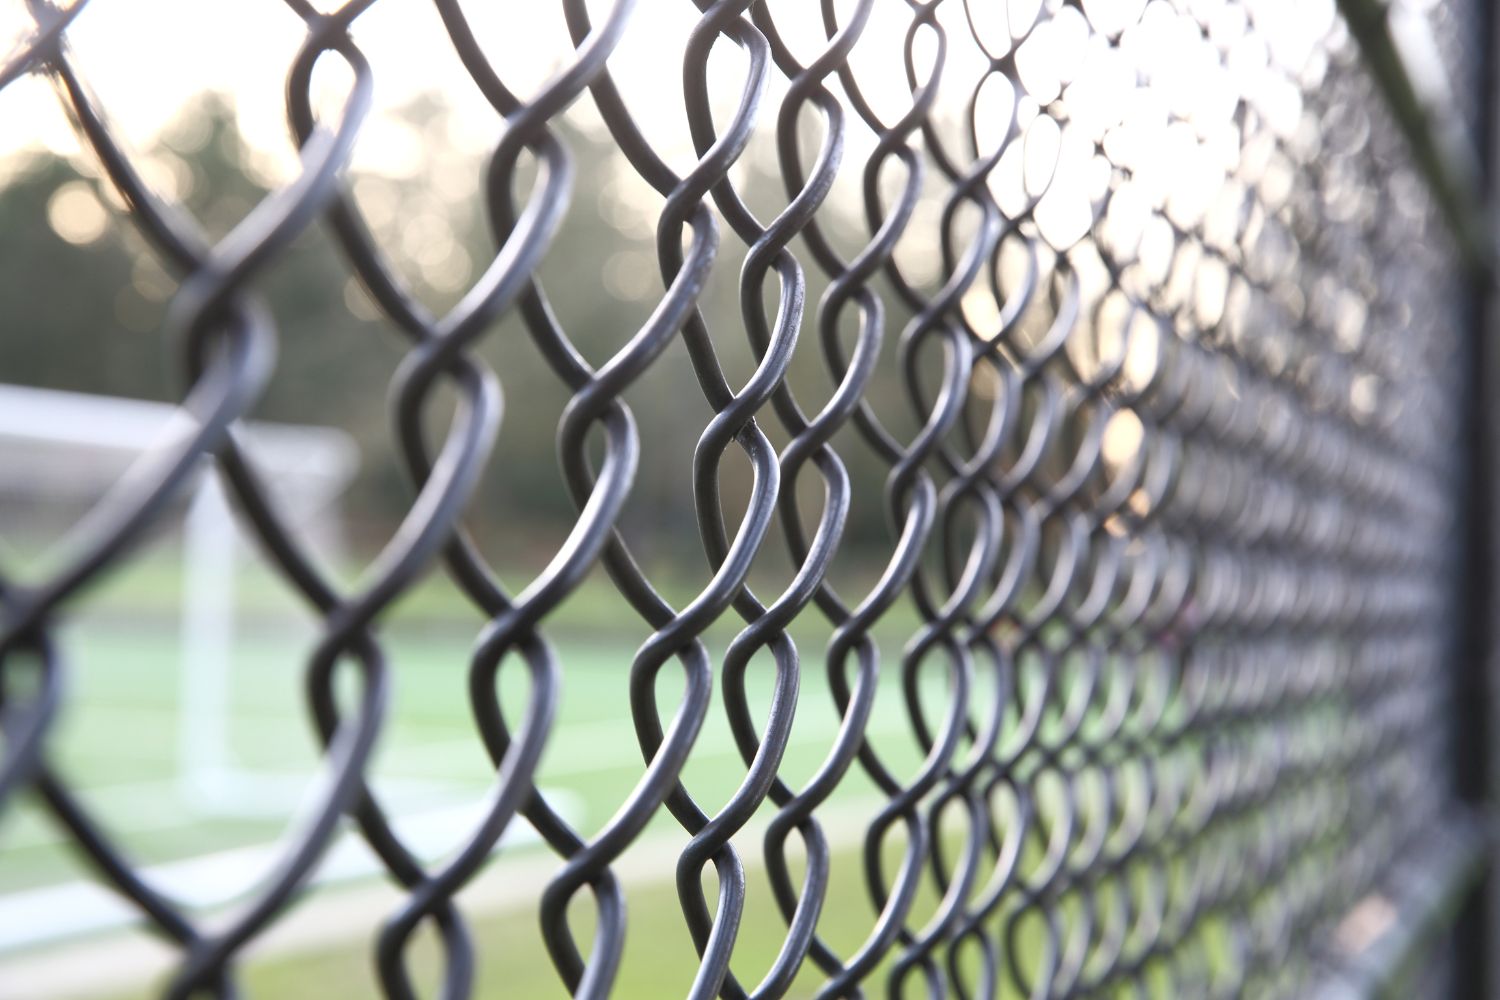 Places where it is common to find chain link fences